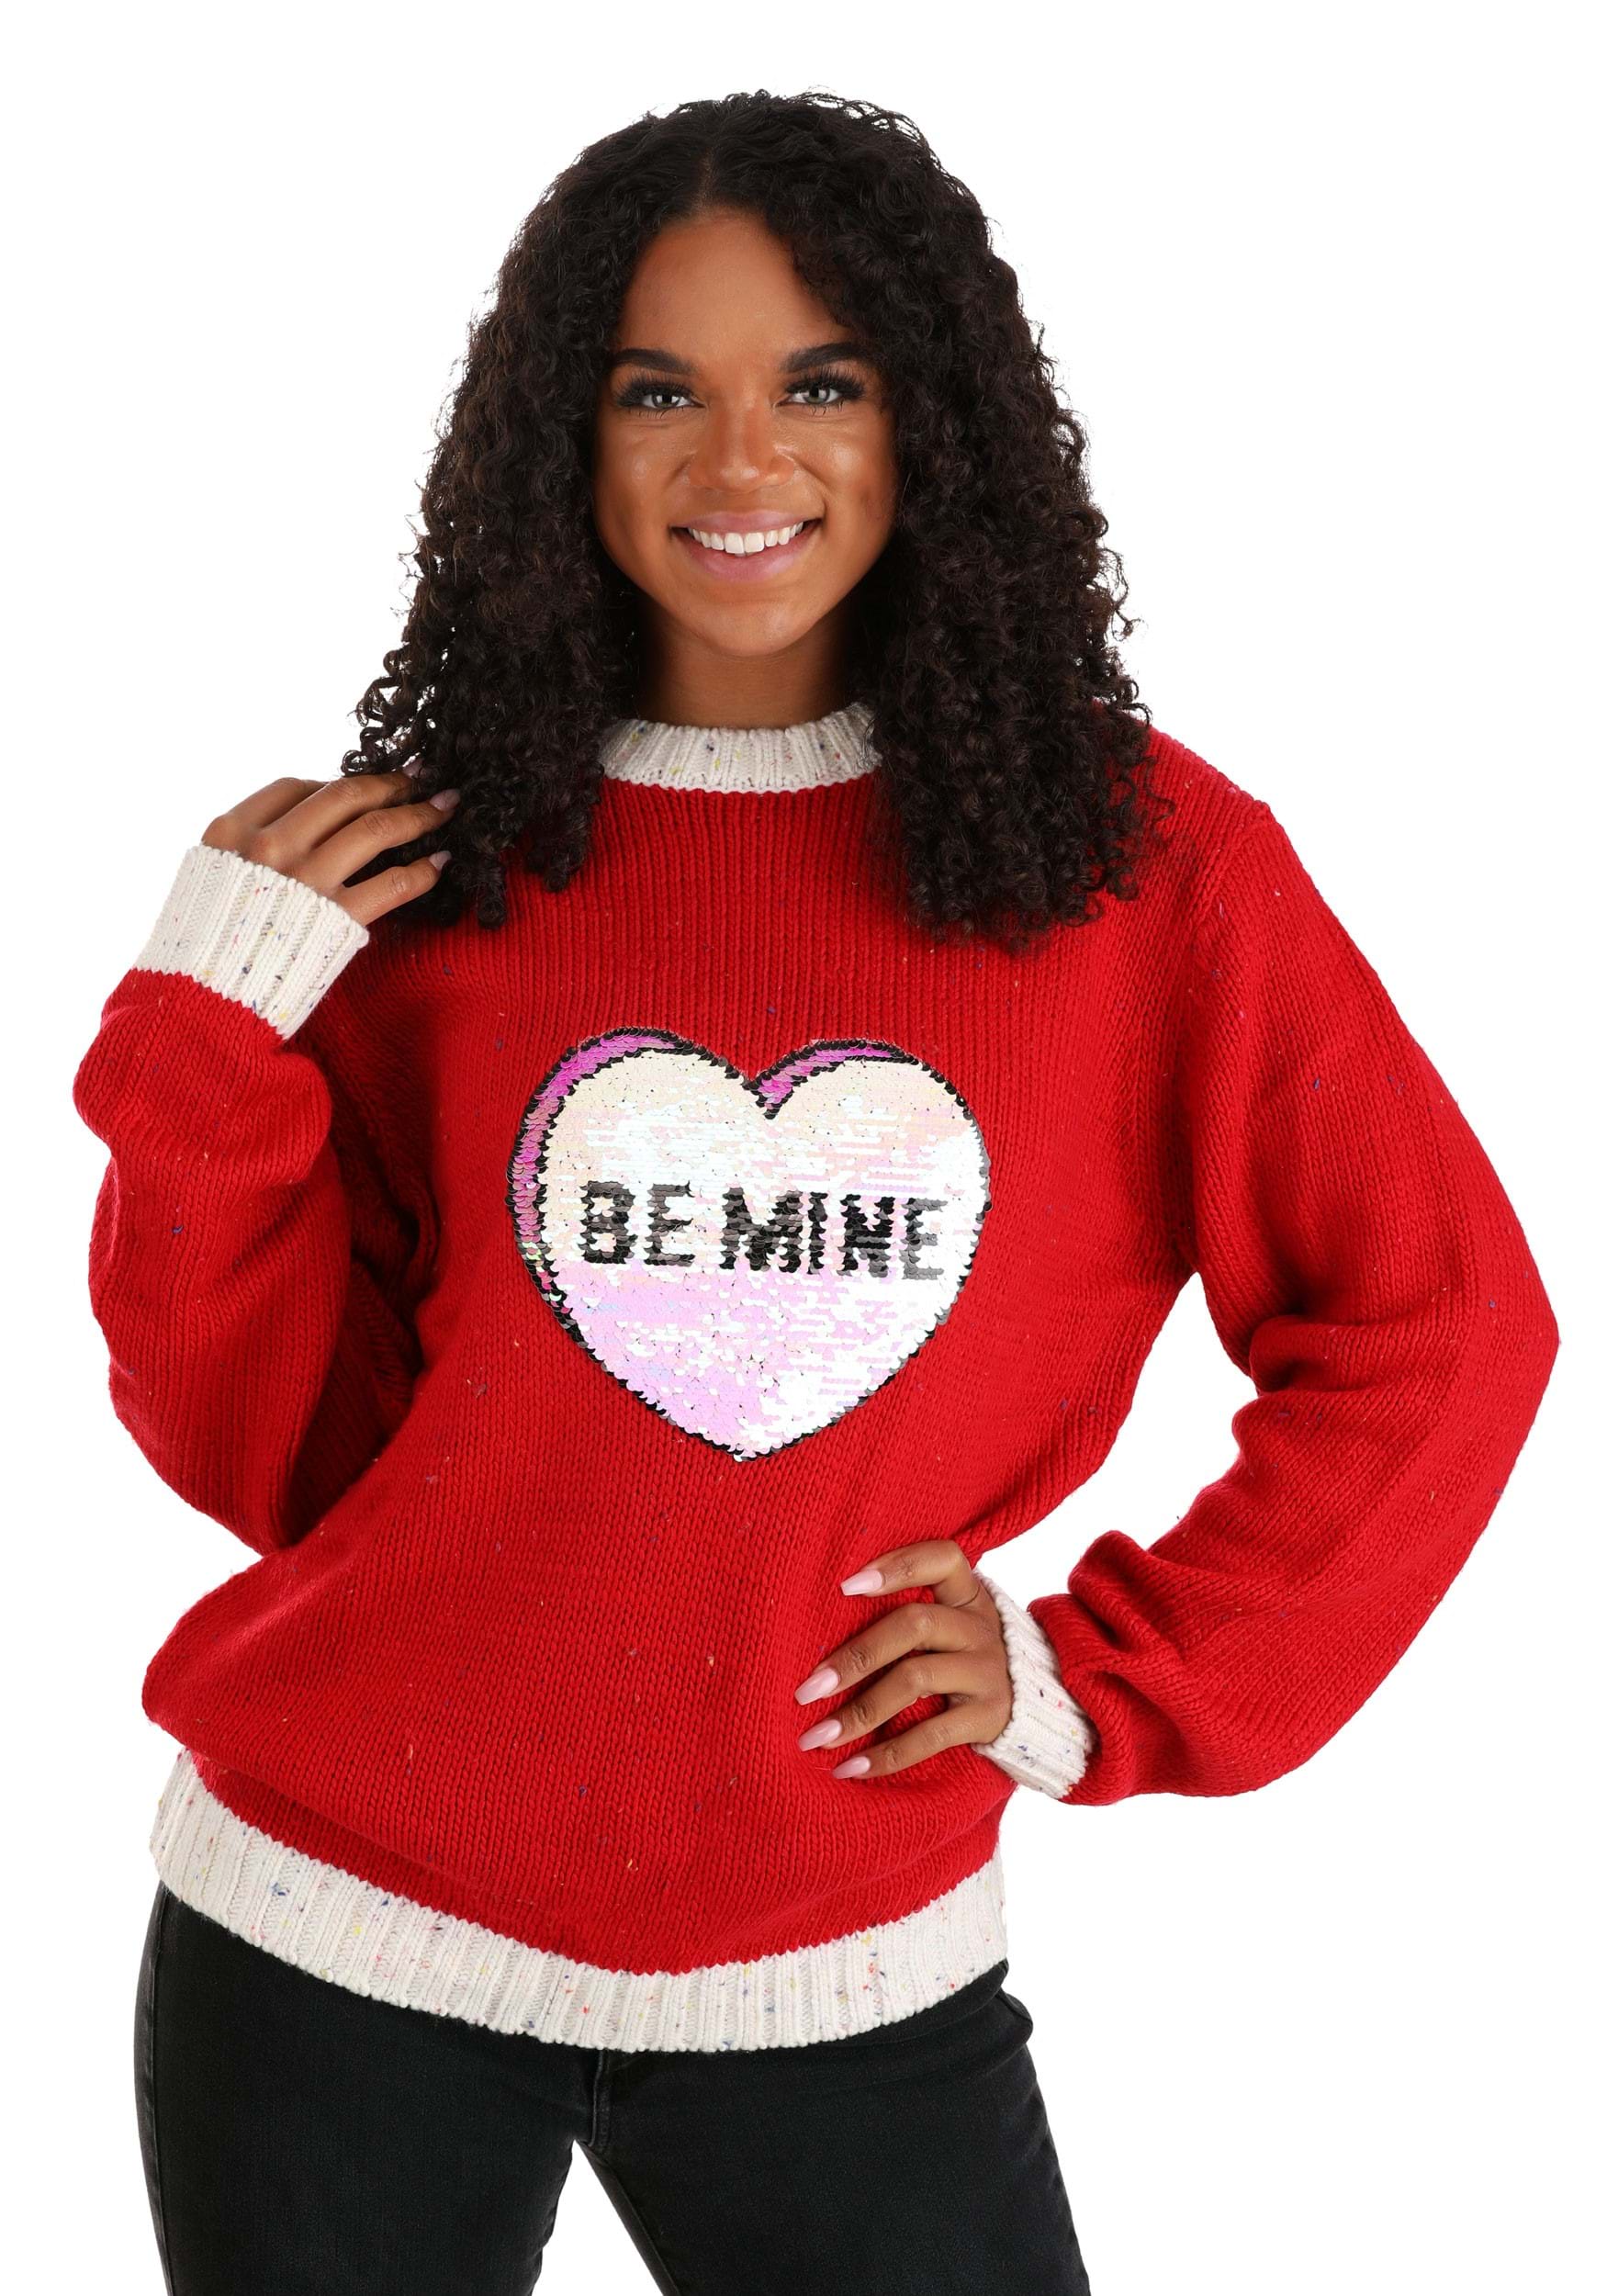 Photos - Fancy Dress FUN Wear Adult Valentine's Day Be Mine Sweater Brown/Red